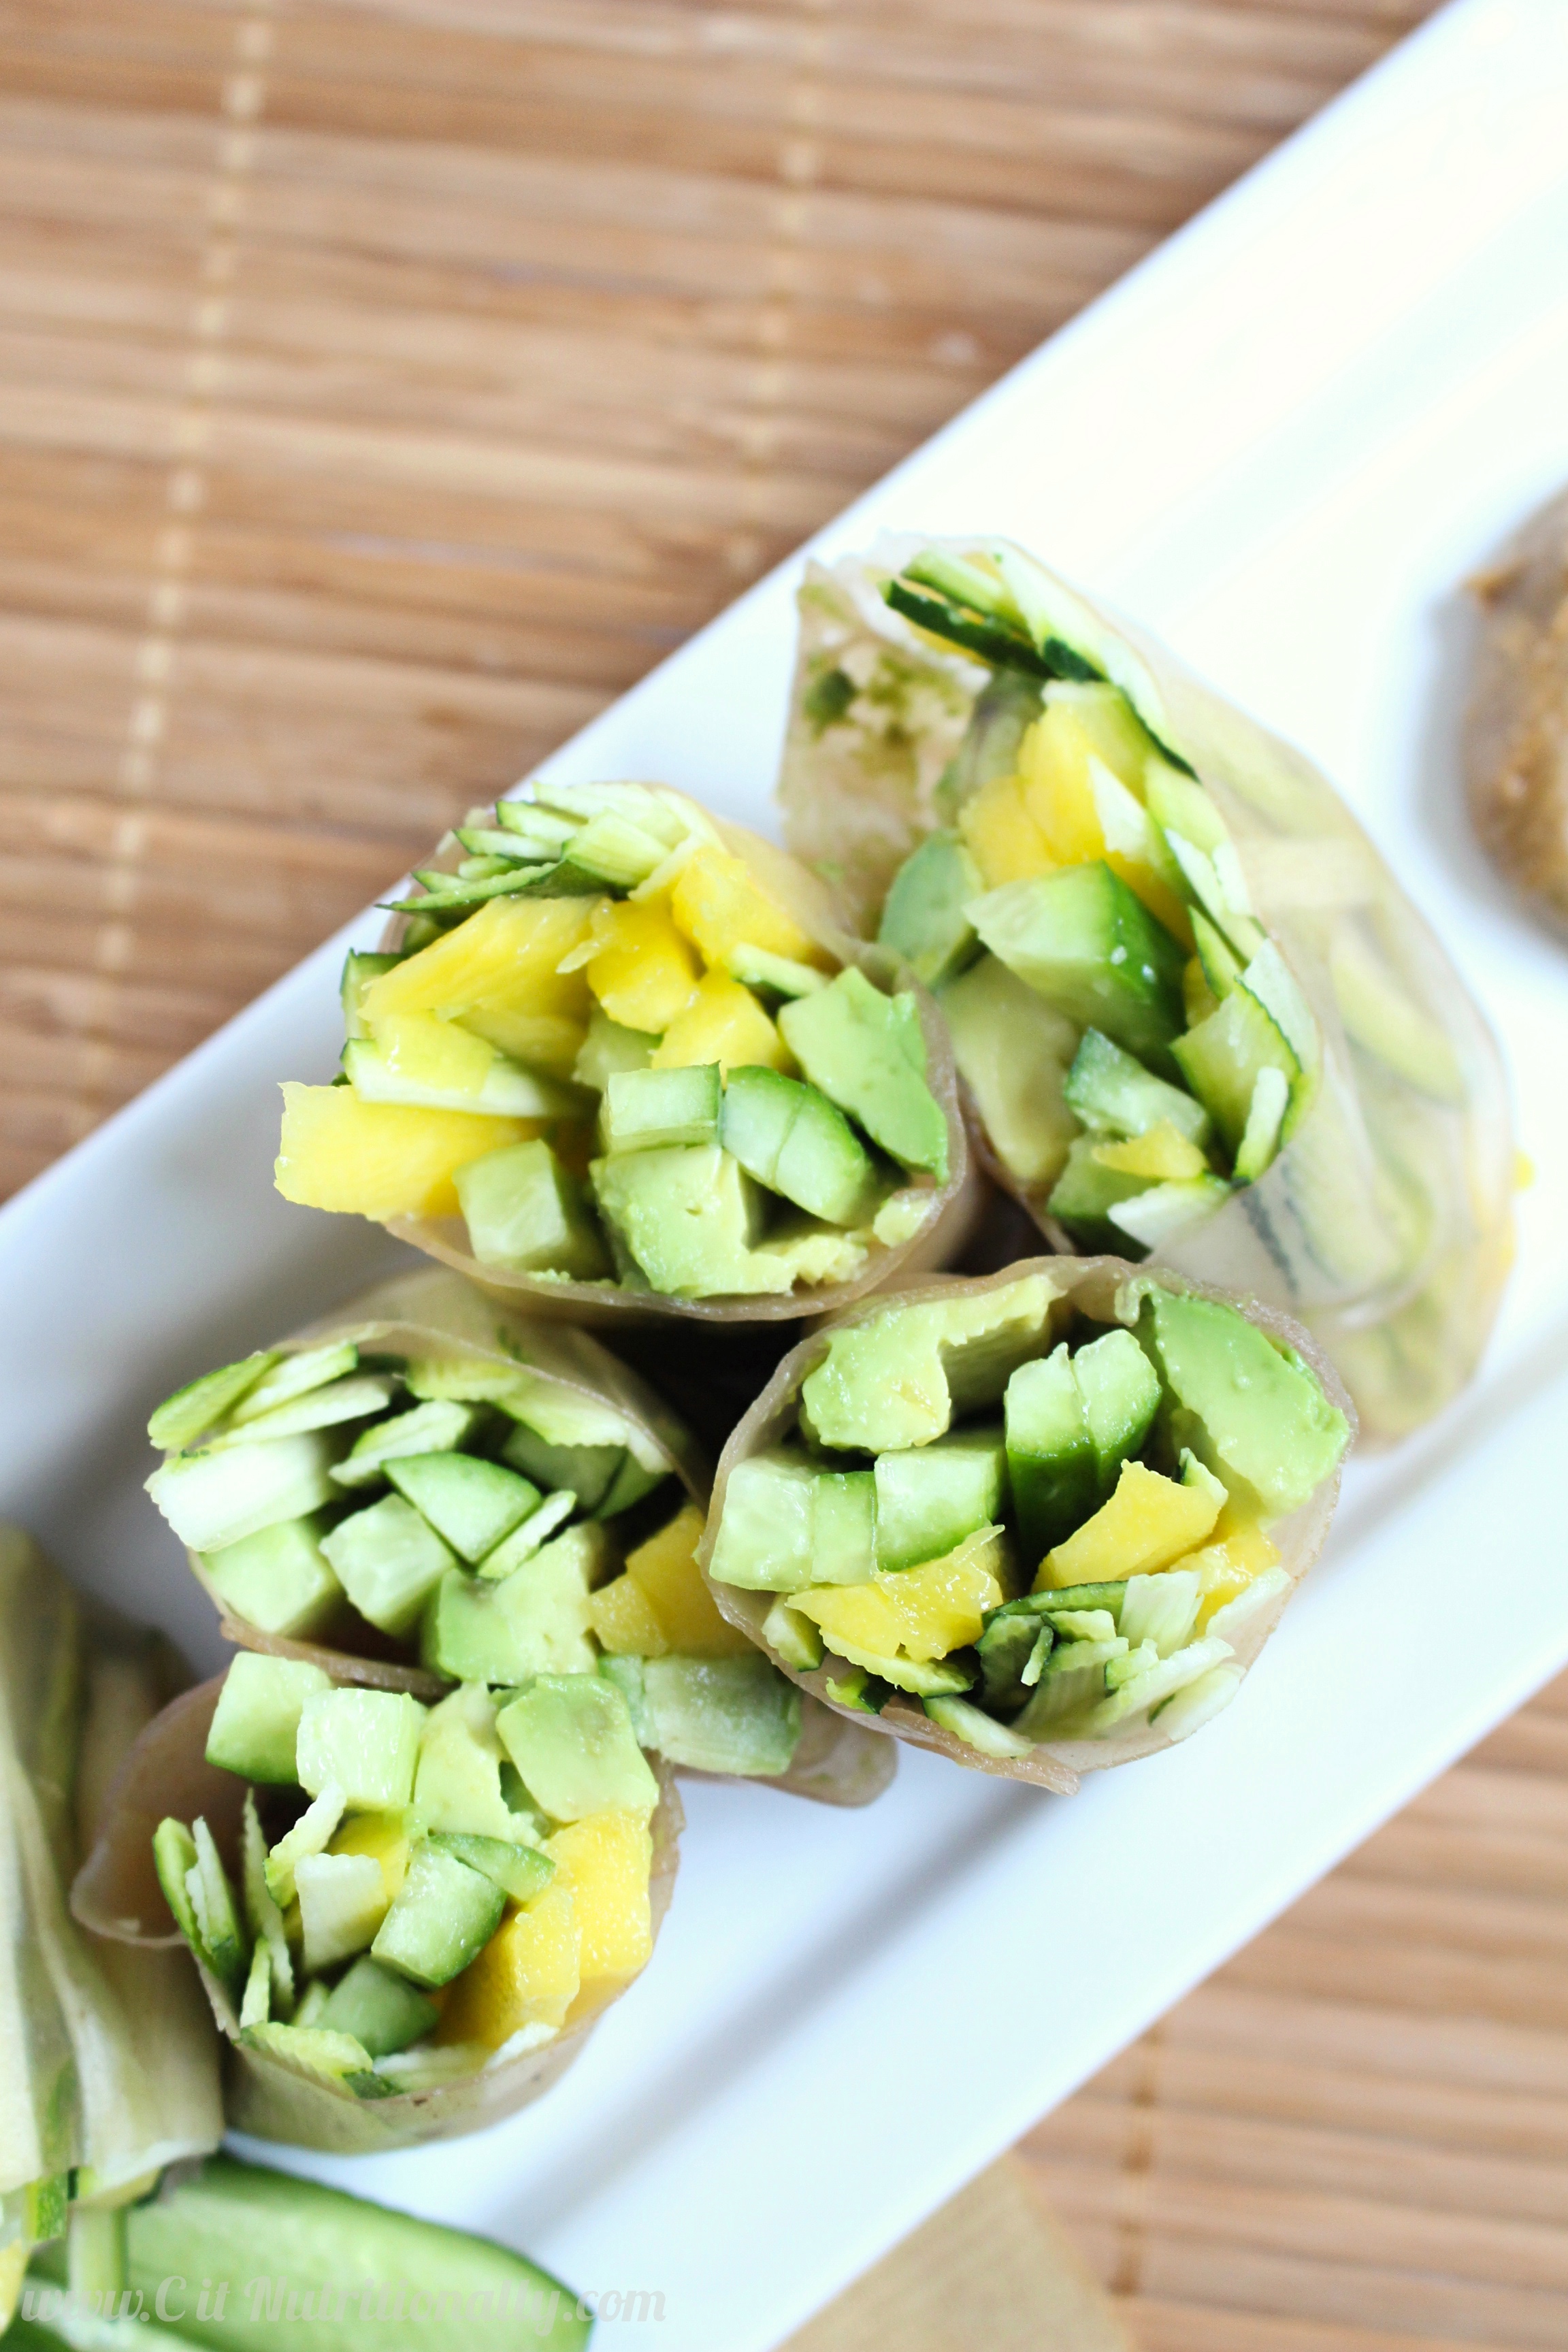 Mango, Cucumber & Zucchini Summer Rolls with Sunflower Seed Dipping Sauce | C it Nutritionally